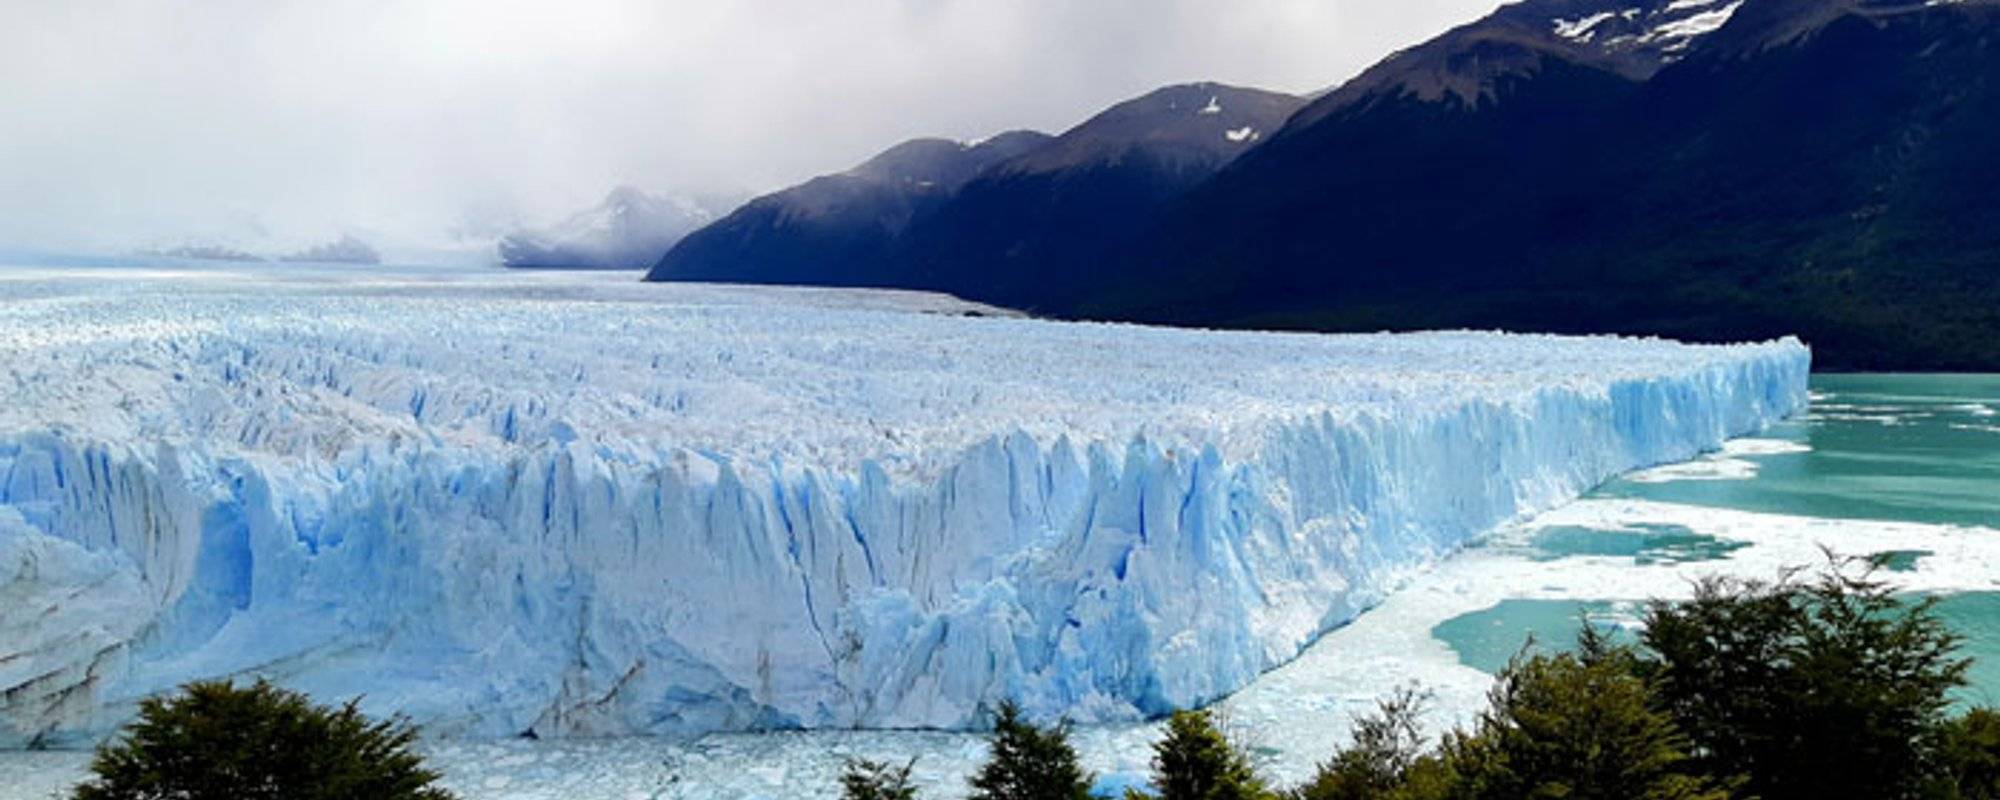 ARGENTINA #3 – Patagonias colossal field of ice and snow